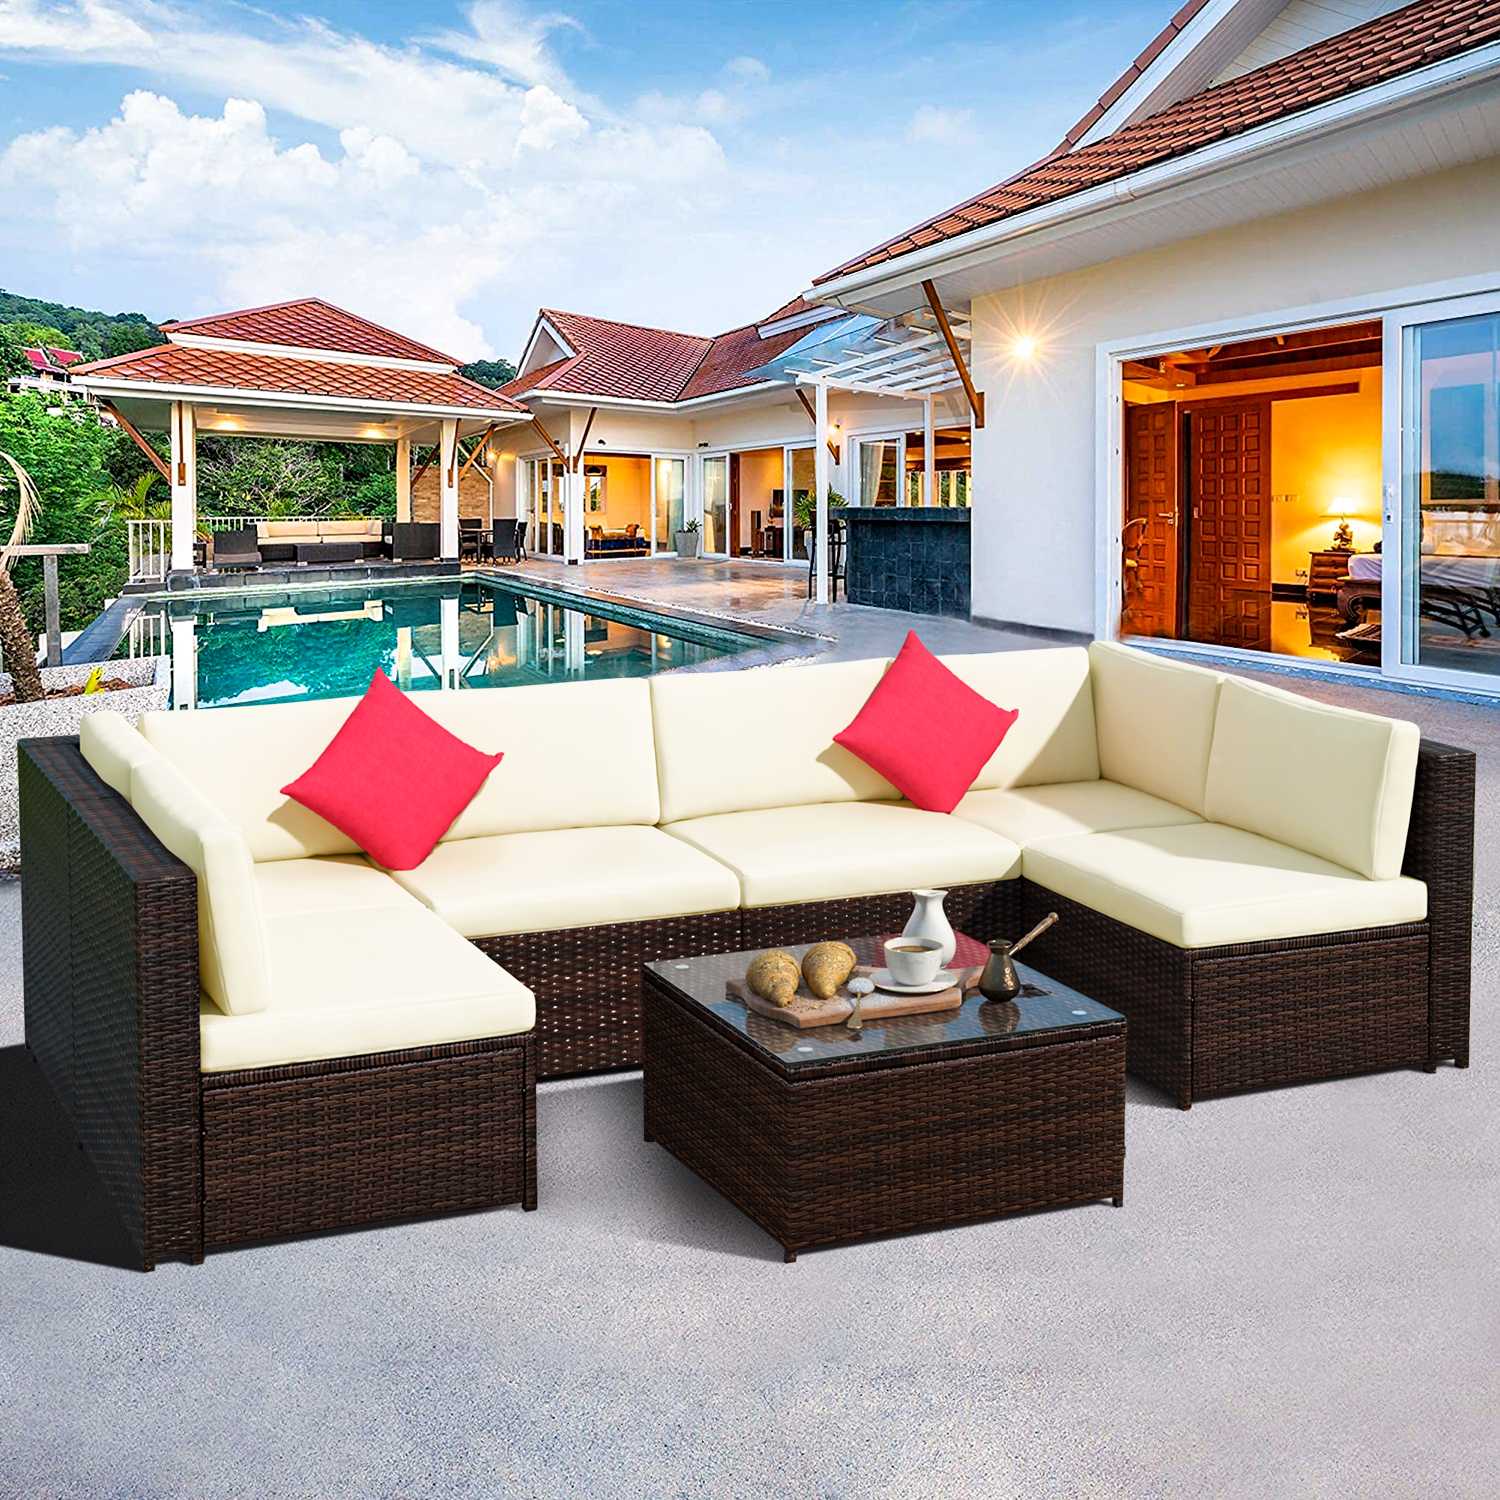 7-Piece Patio Furniture Sets on Sale, SEGMART 7-Piece Wicker Patio Conversation Furniture Set w/ Seat Cushions & Tempered Glass Coffee, Wicker Sofa Sets for Porch Poolside Backyard Garden, S13078 - image 1 of 9